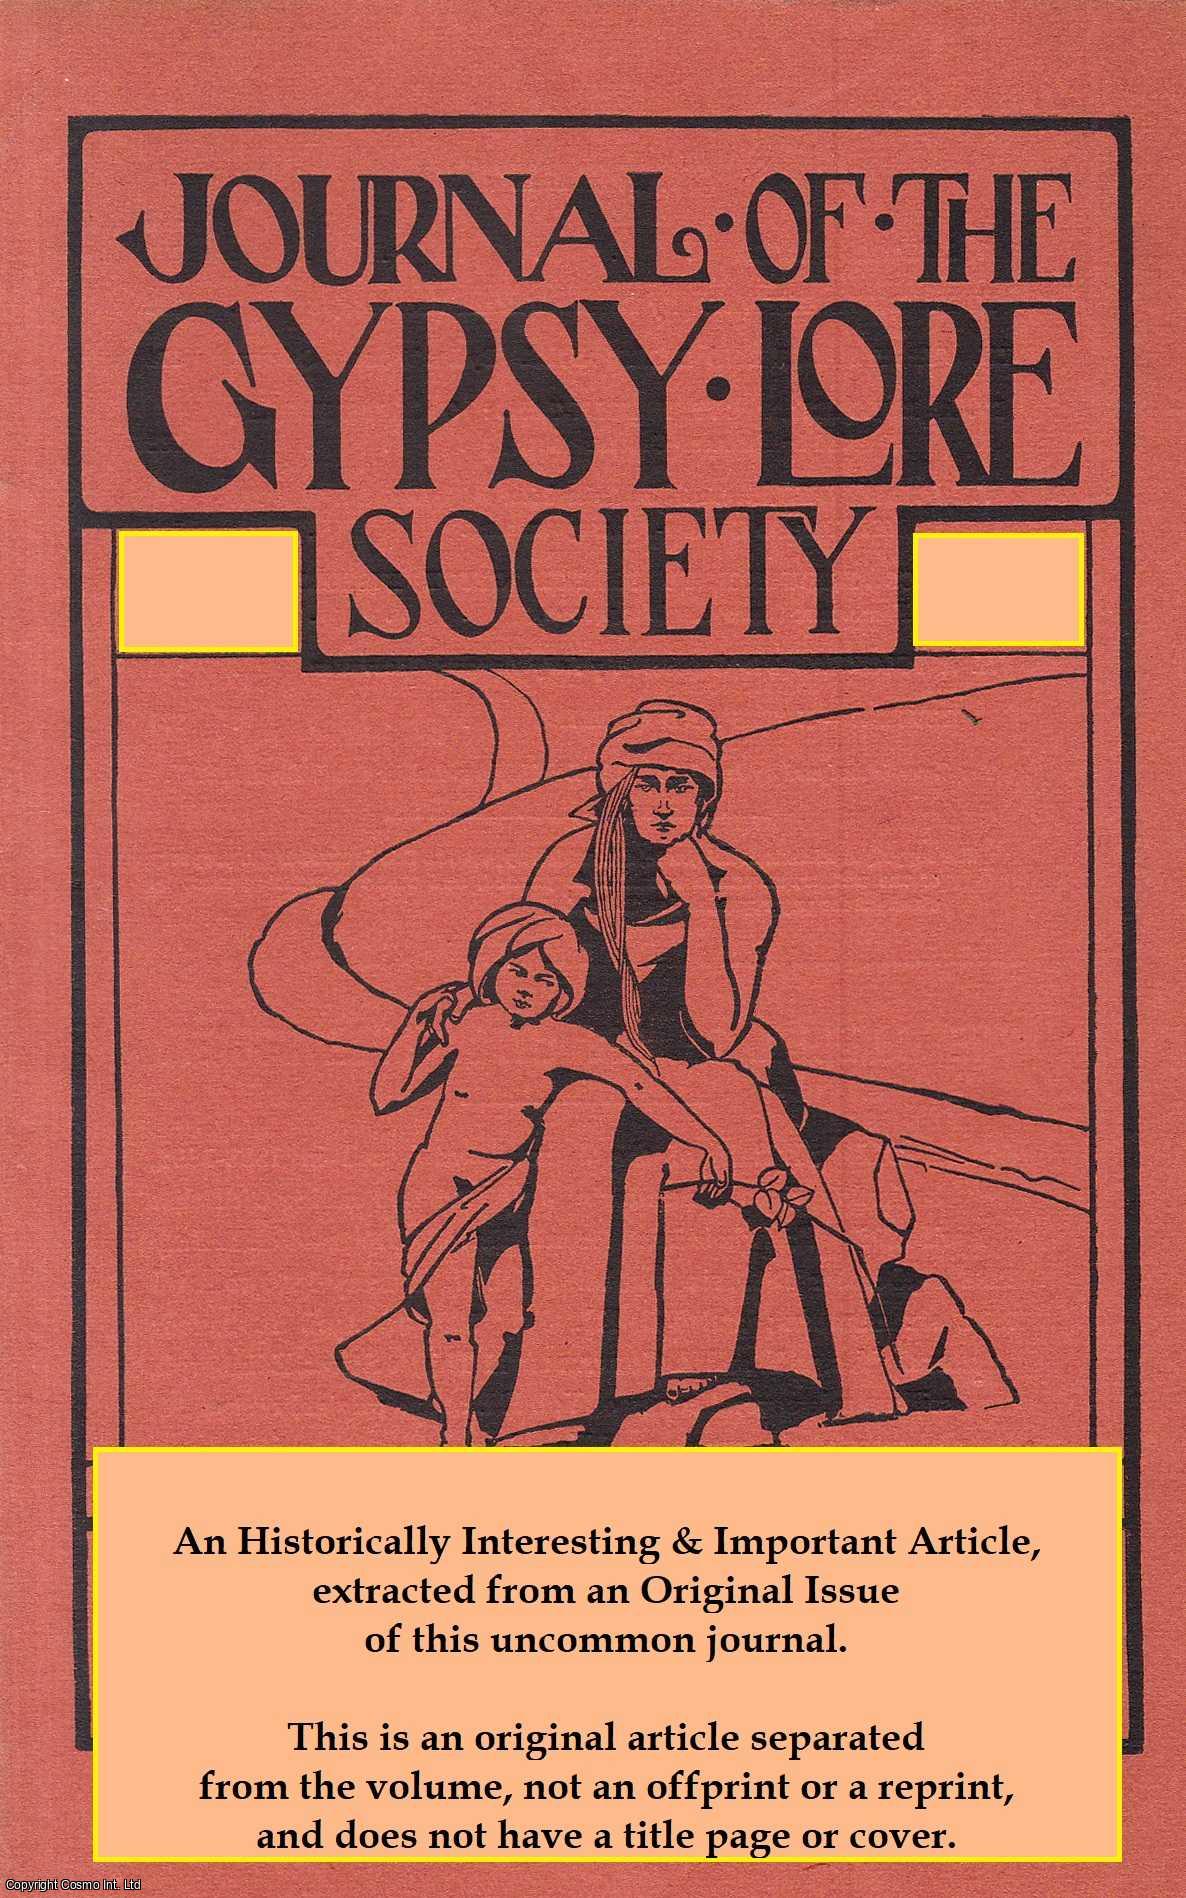 Endre de Spur - Gypsies in the Borough (part 2) of Braddock, U.S.A. An uncommon original article from the Journal of the Gypsy Lore Society, 1960.